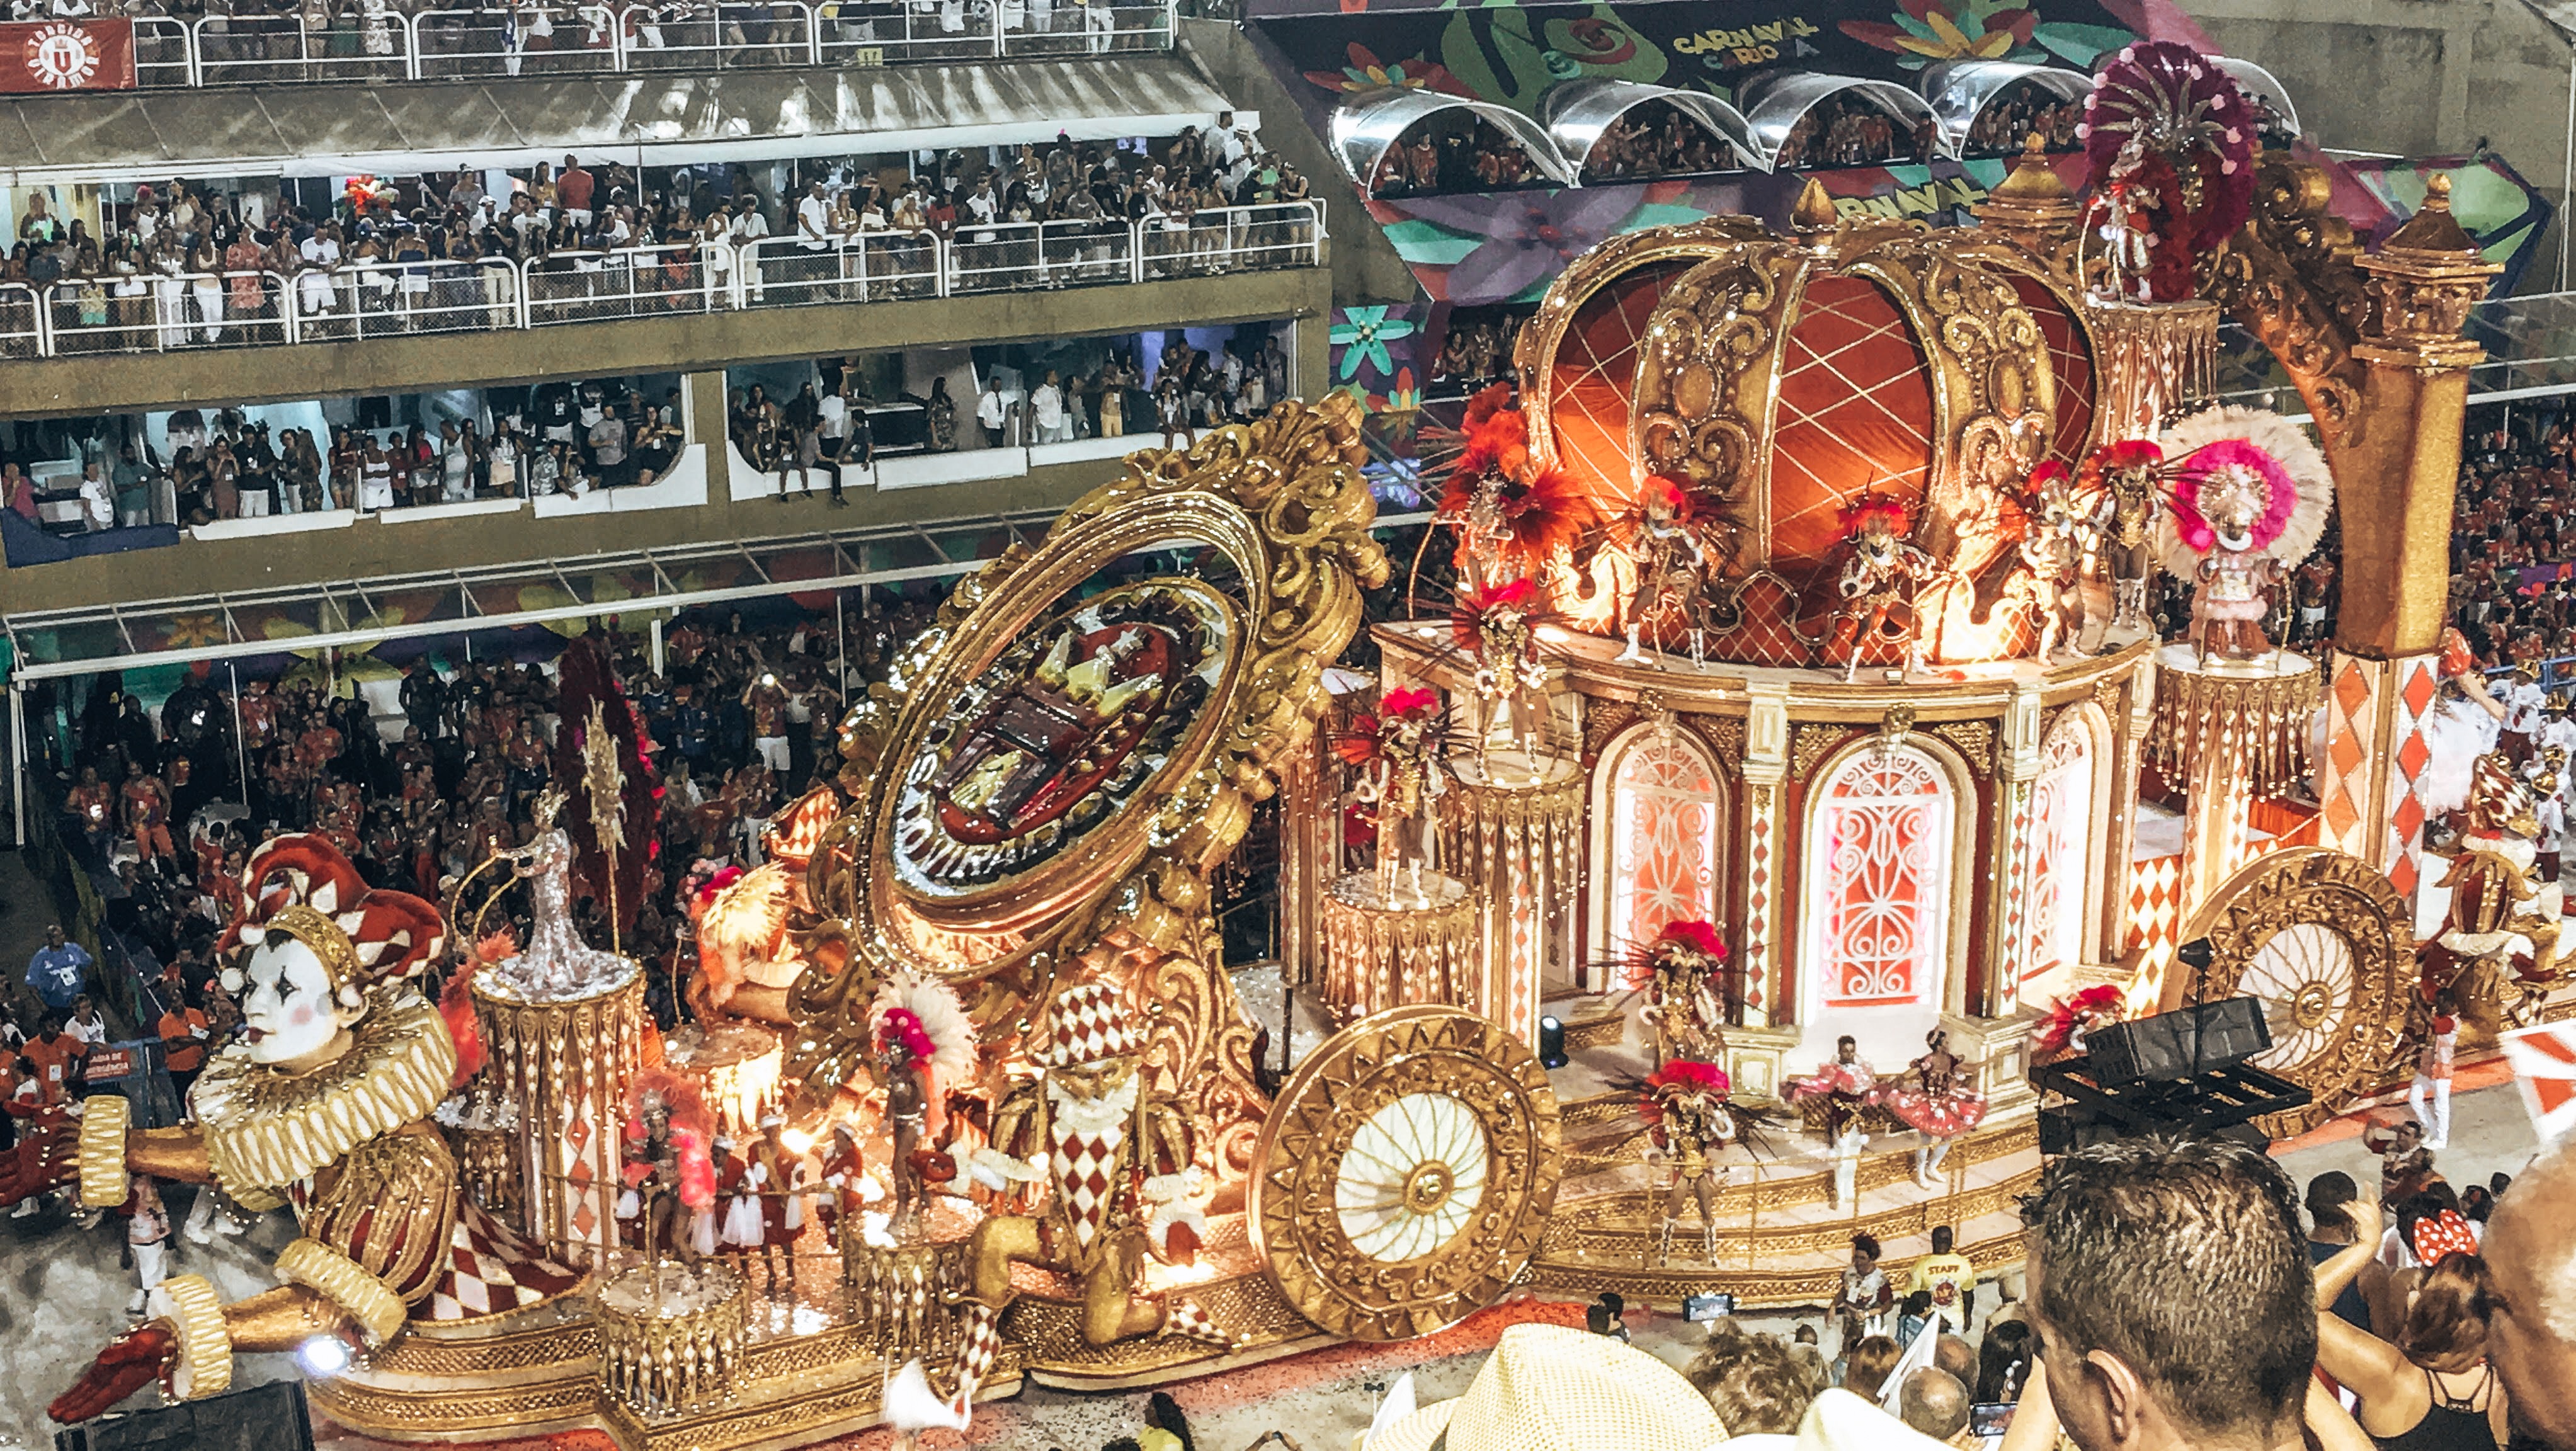 Sambadrome Rio Carnival - Gold lavish float with Queen of hearts head and crown design